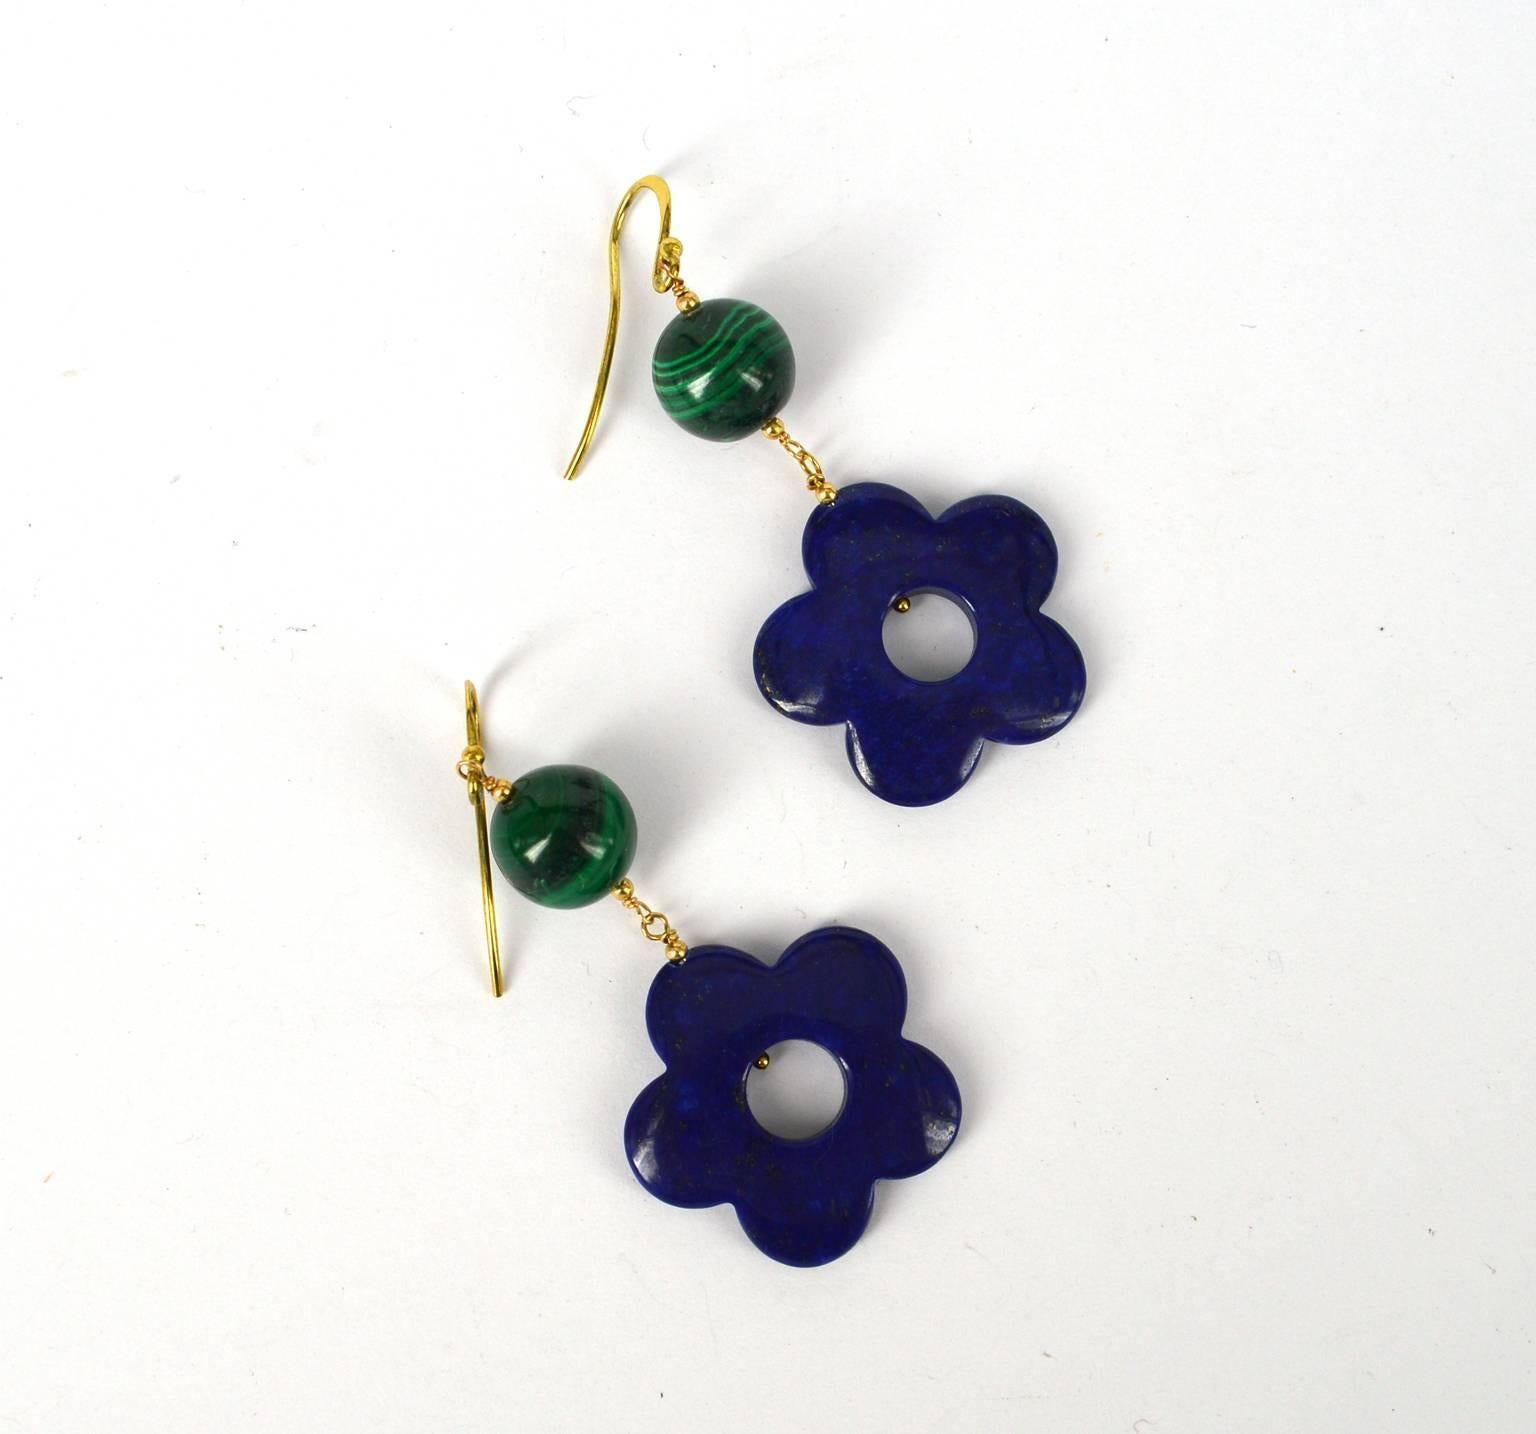 Contemporary Lapis and Malachite Flower Earrings